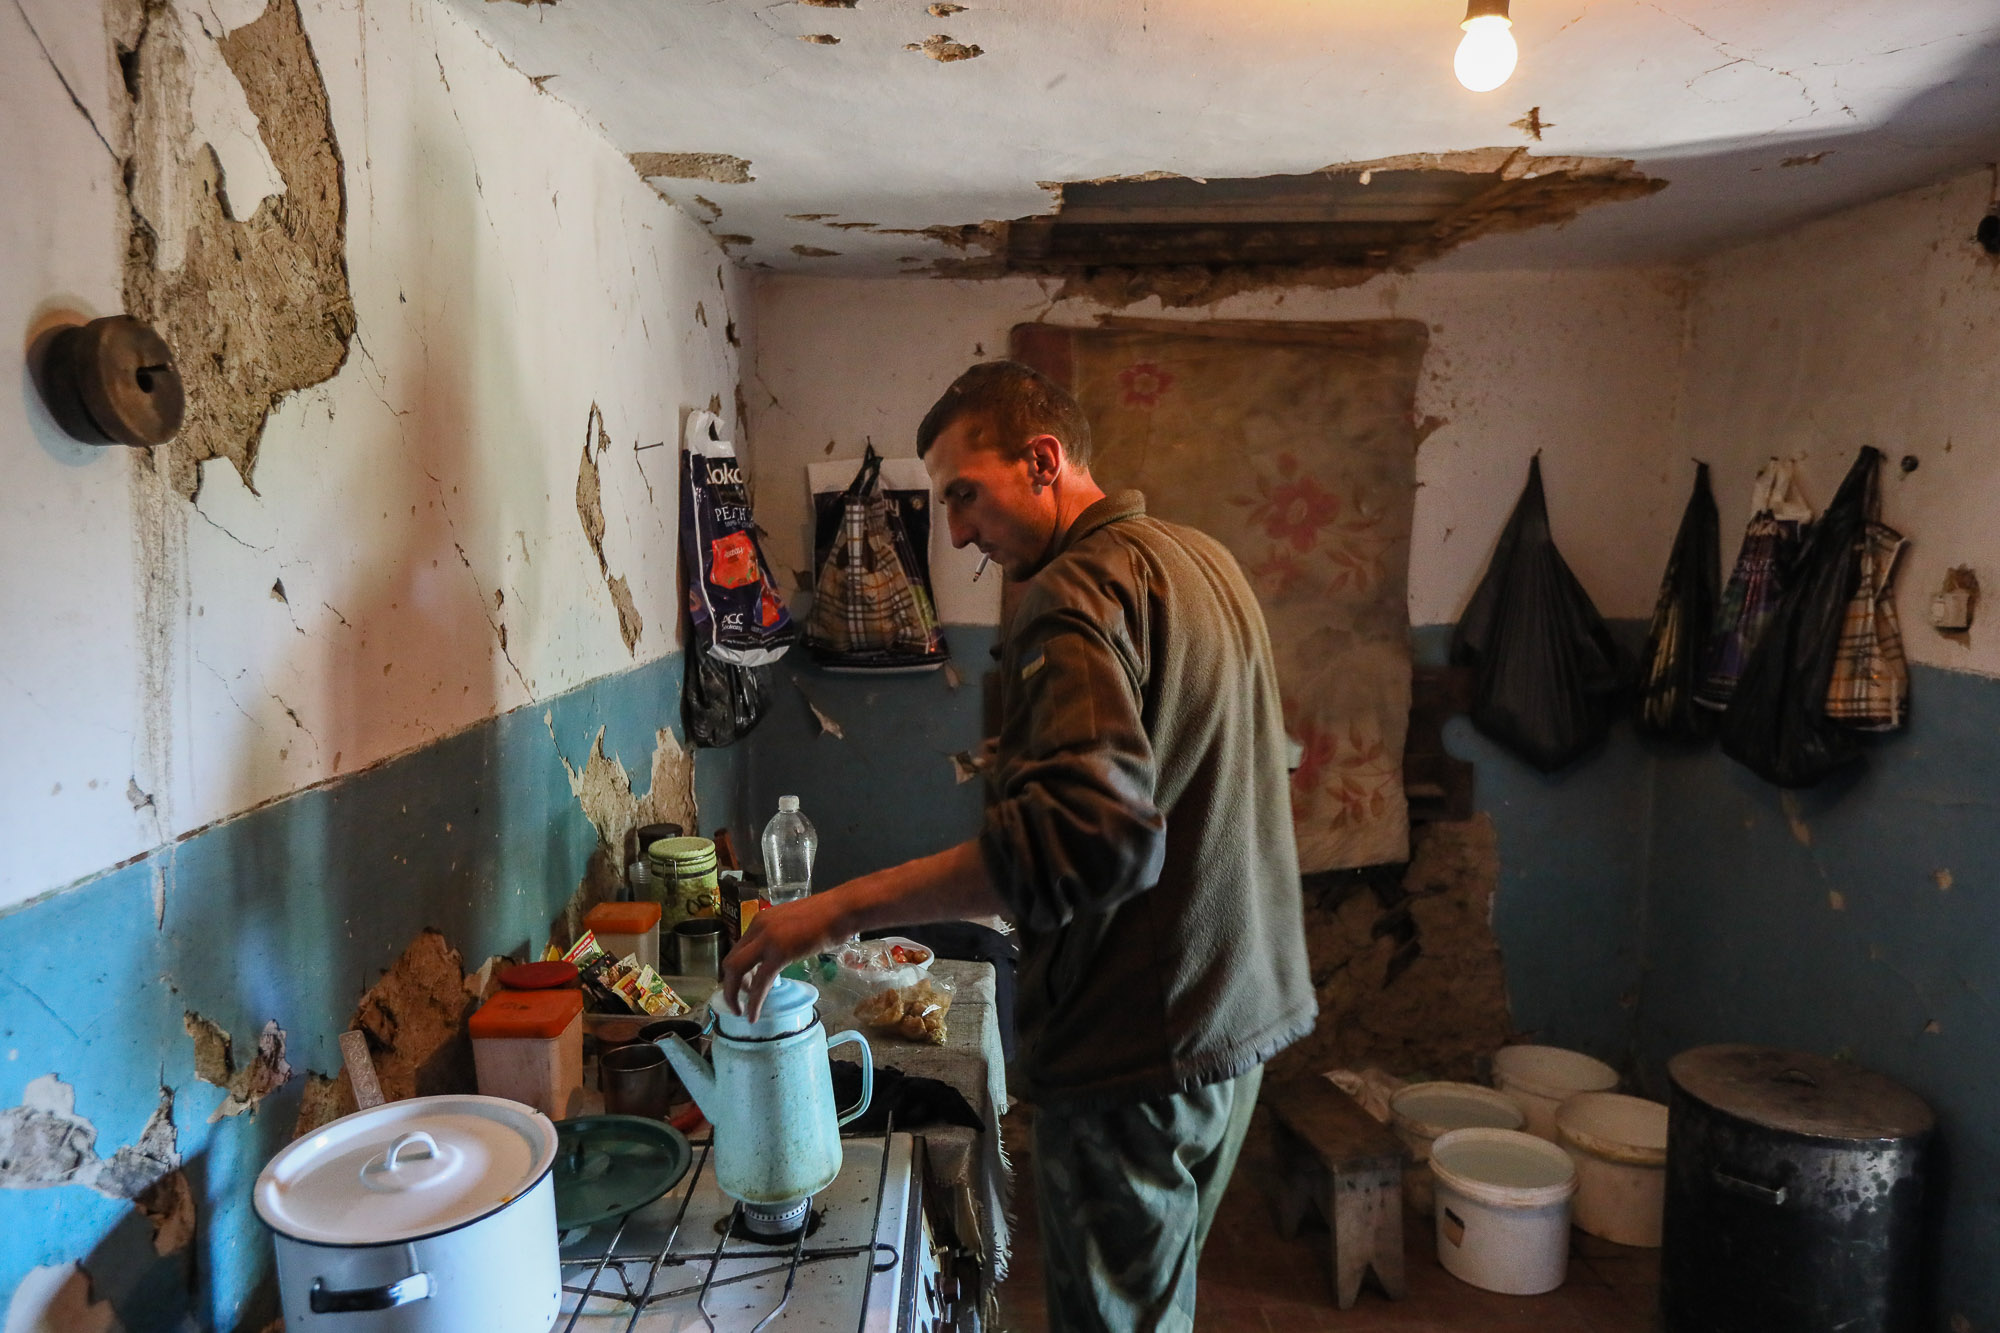 A Ukrainian soldier boils water for tea in a kitchen of an abandoned house in the frontline town of Zaytseve, eastern Ukraine, on June 25, 2018.